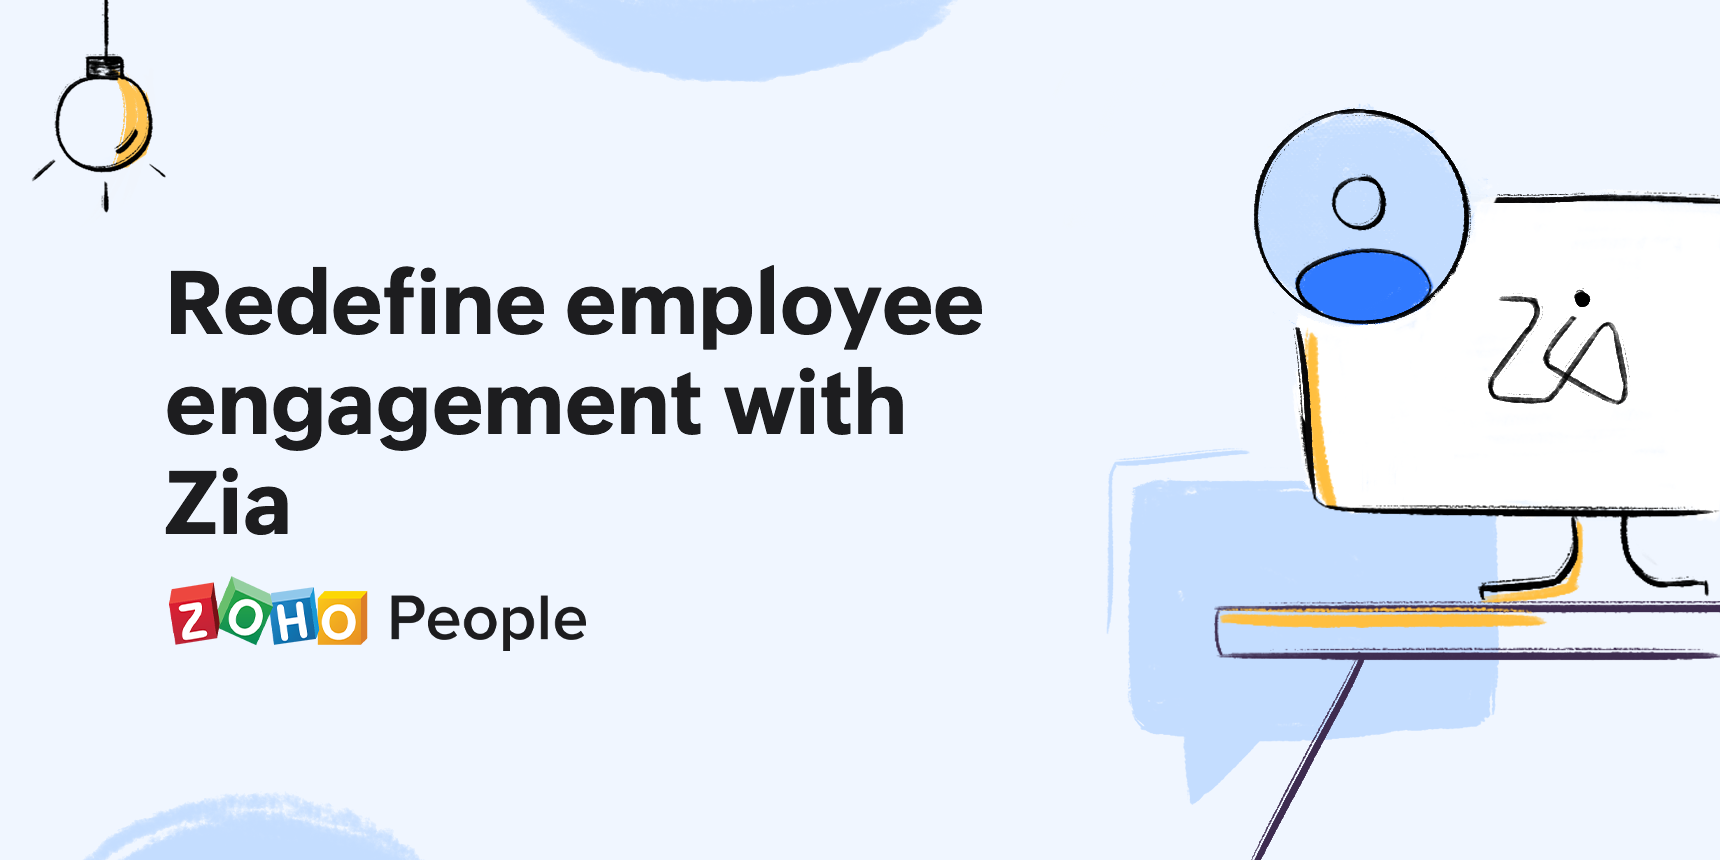 Redefine employee engagement with Zia